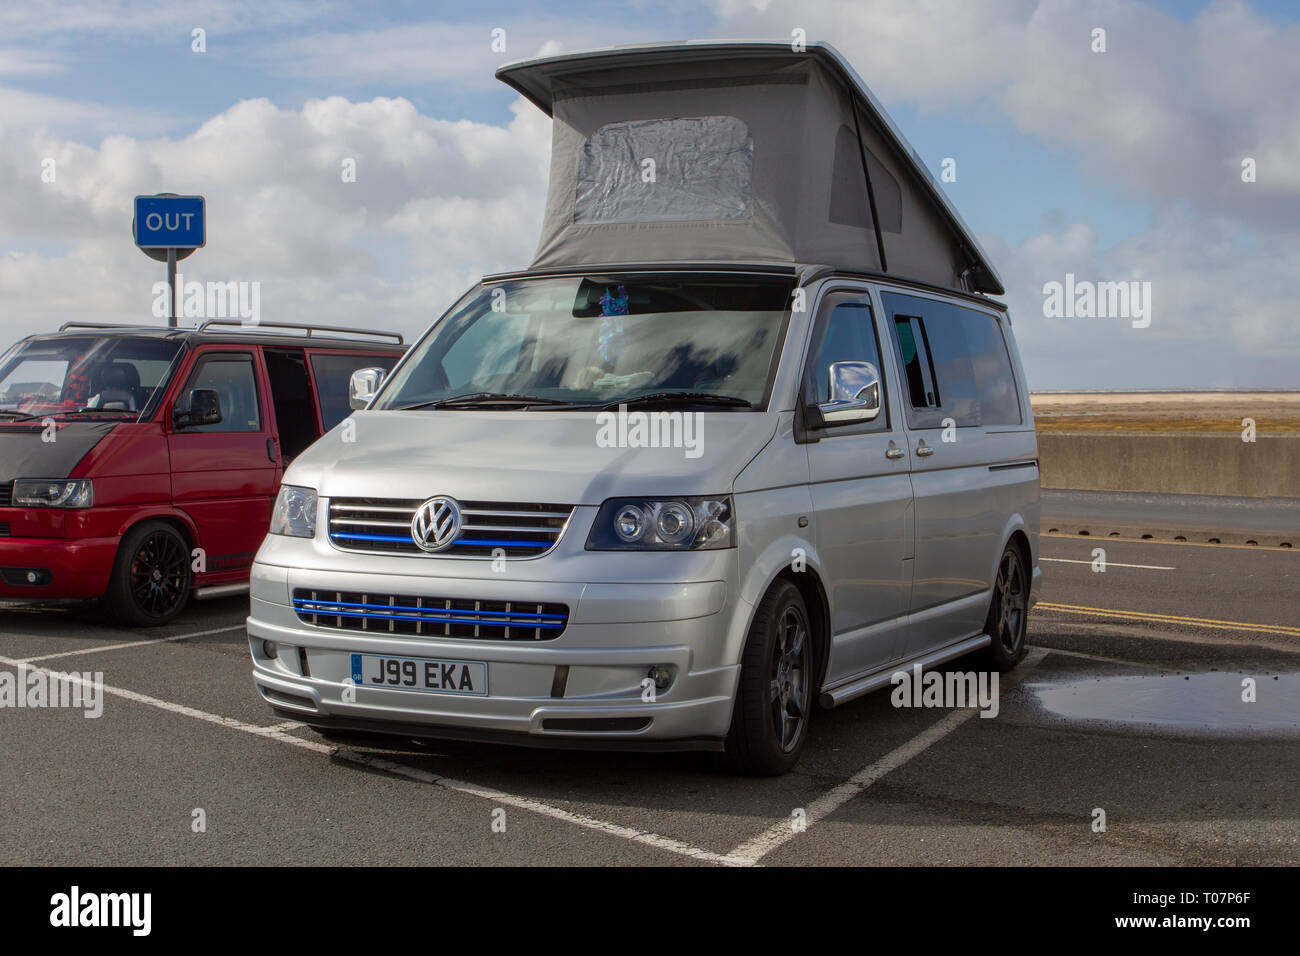 Vw Transporter Modern High Resolution Stock Photography and Images - Alamy